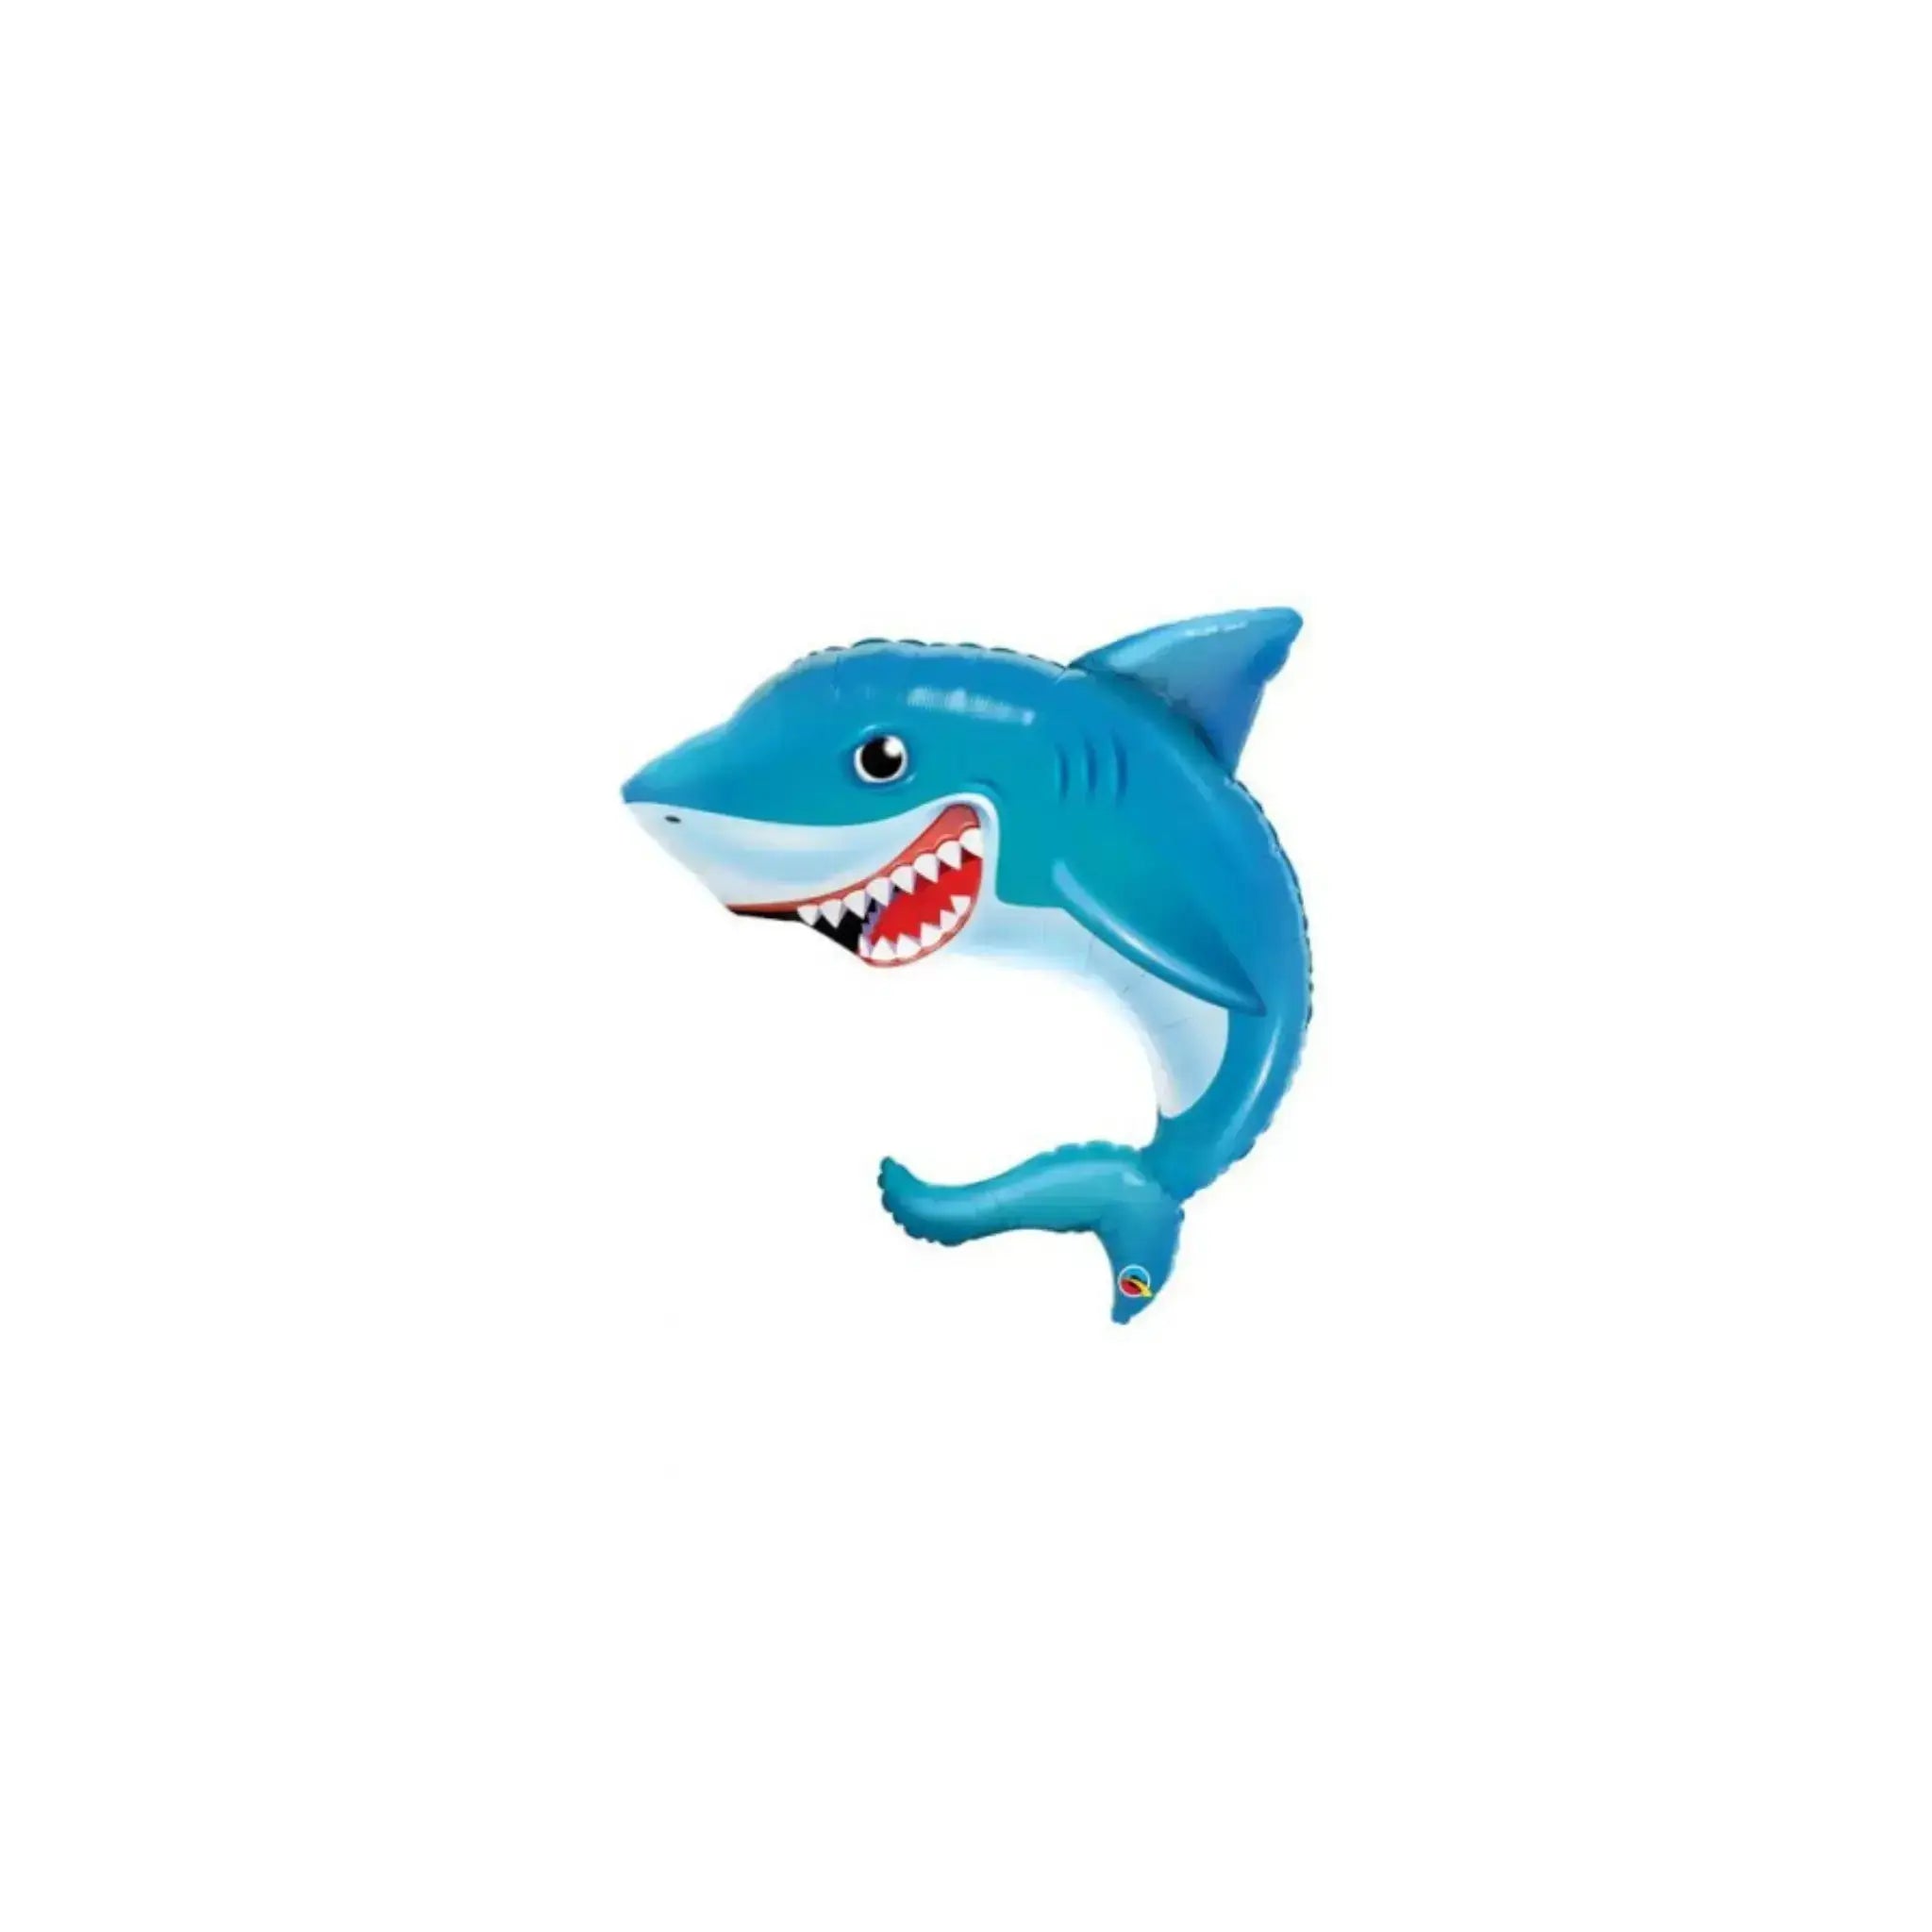 Smiling Shark Balloon | The Party Hut